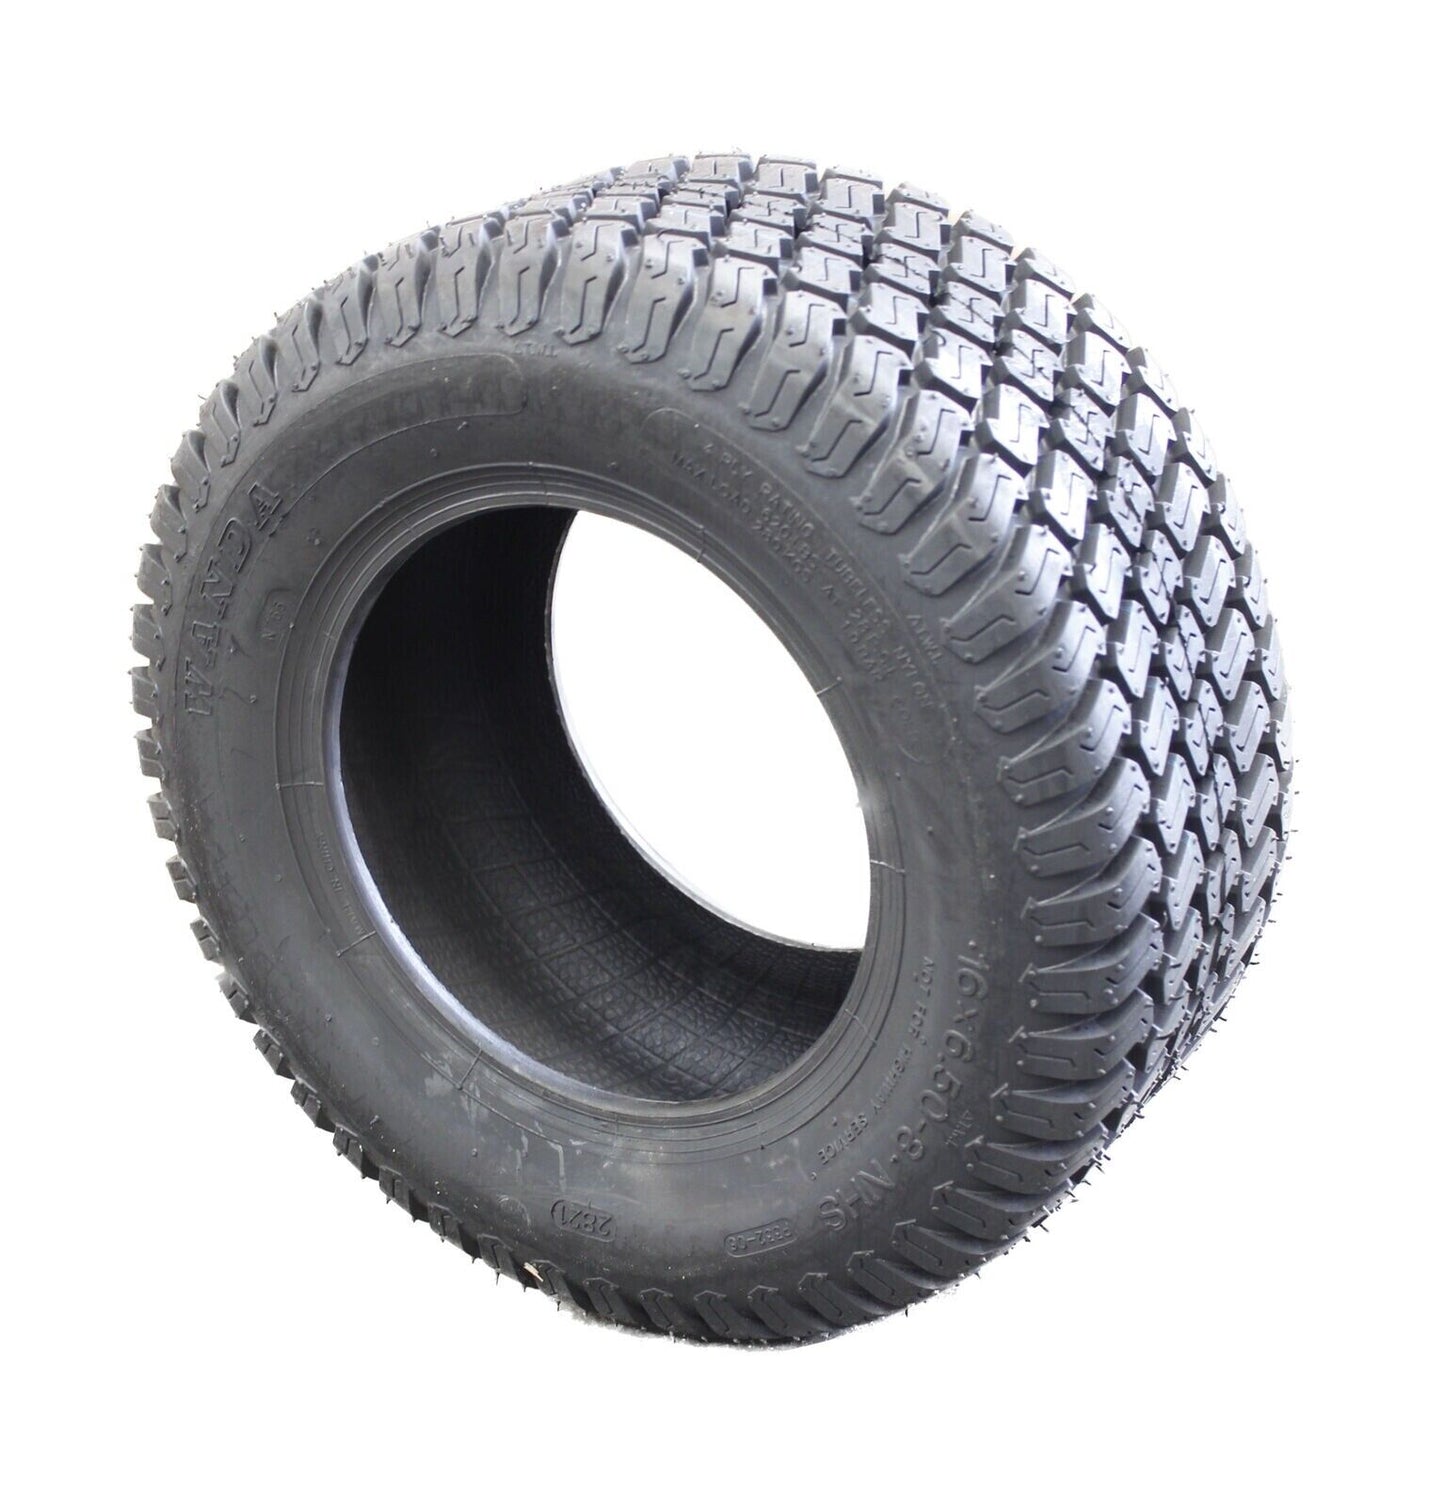 2PCS 18 X 8.50 - 8" TYRES 4PLY suit RIDE ON MOWERS/GOLF CARTS/MINI DIGGERS